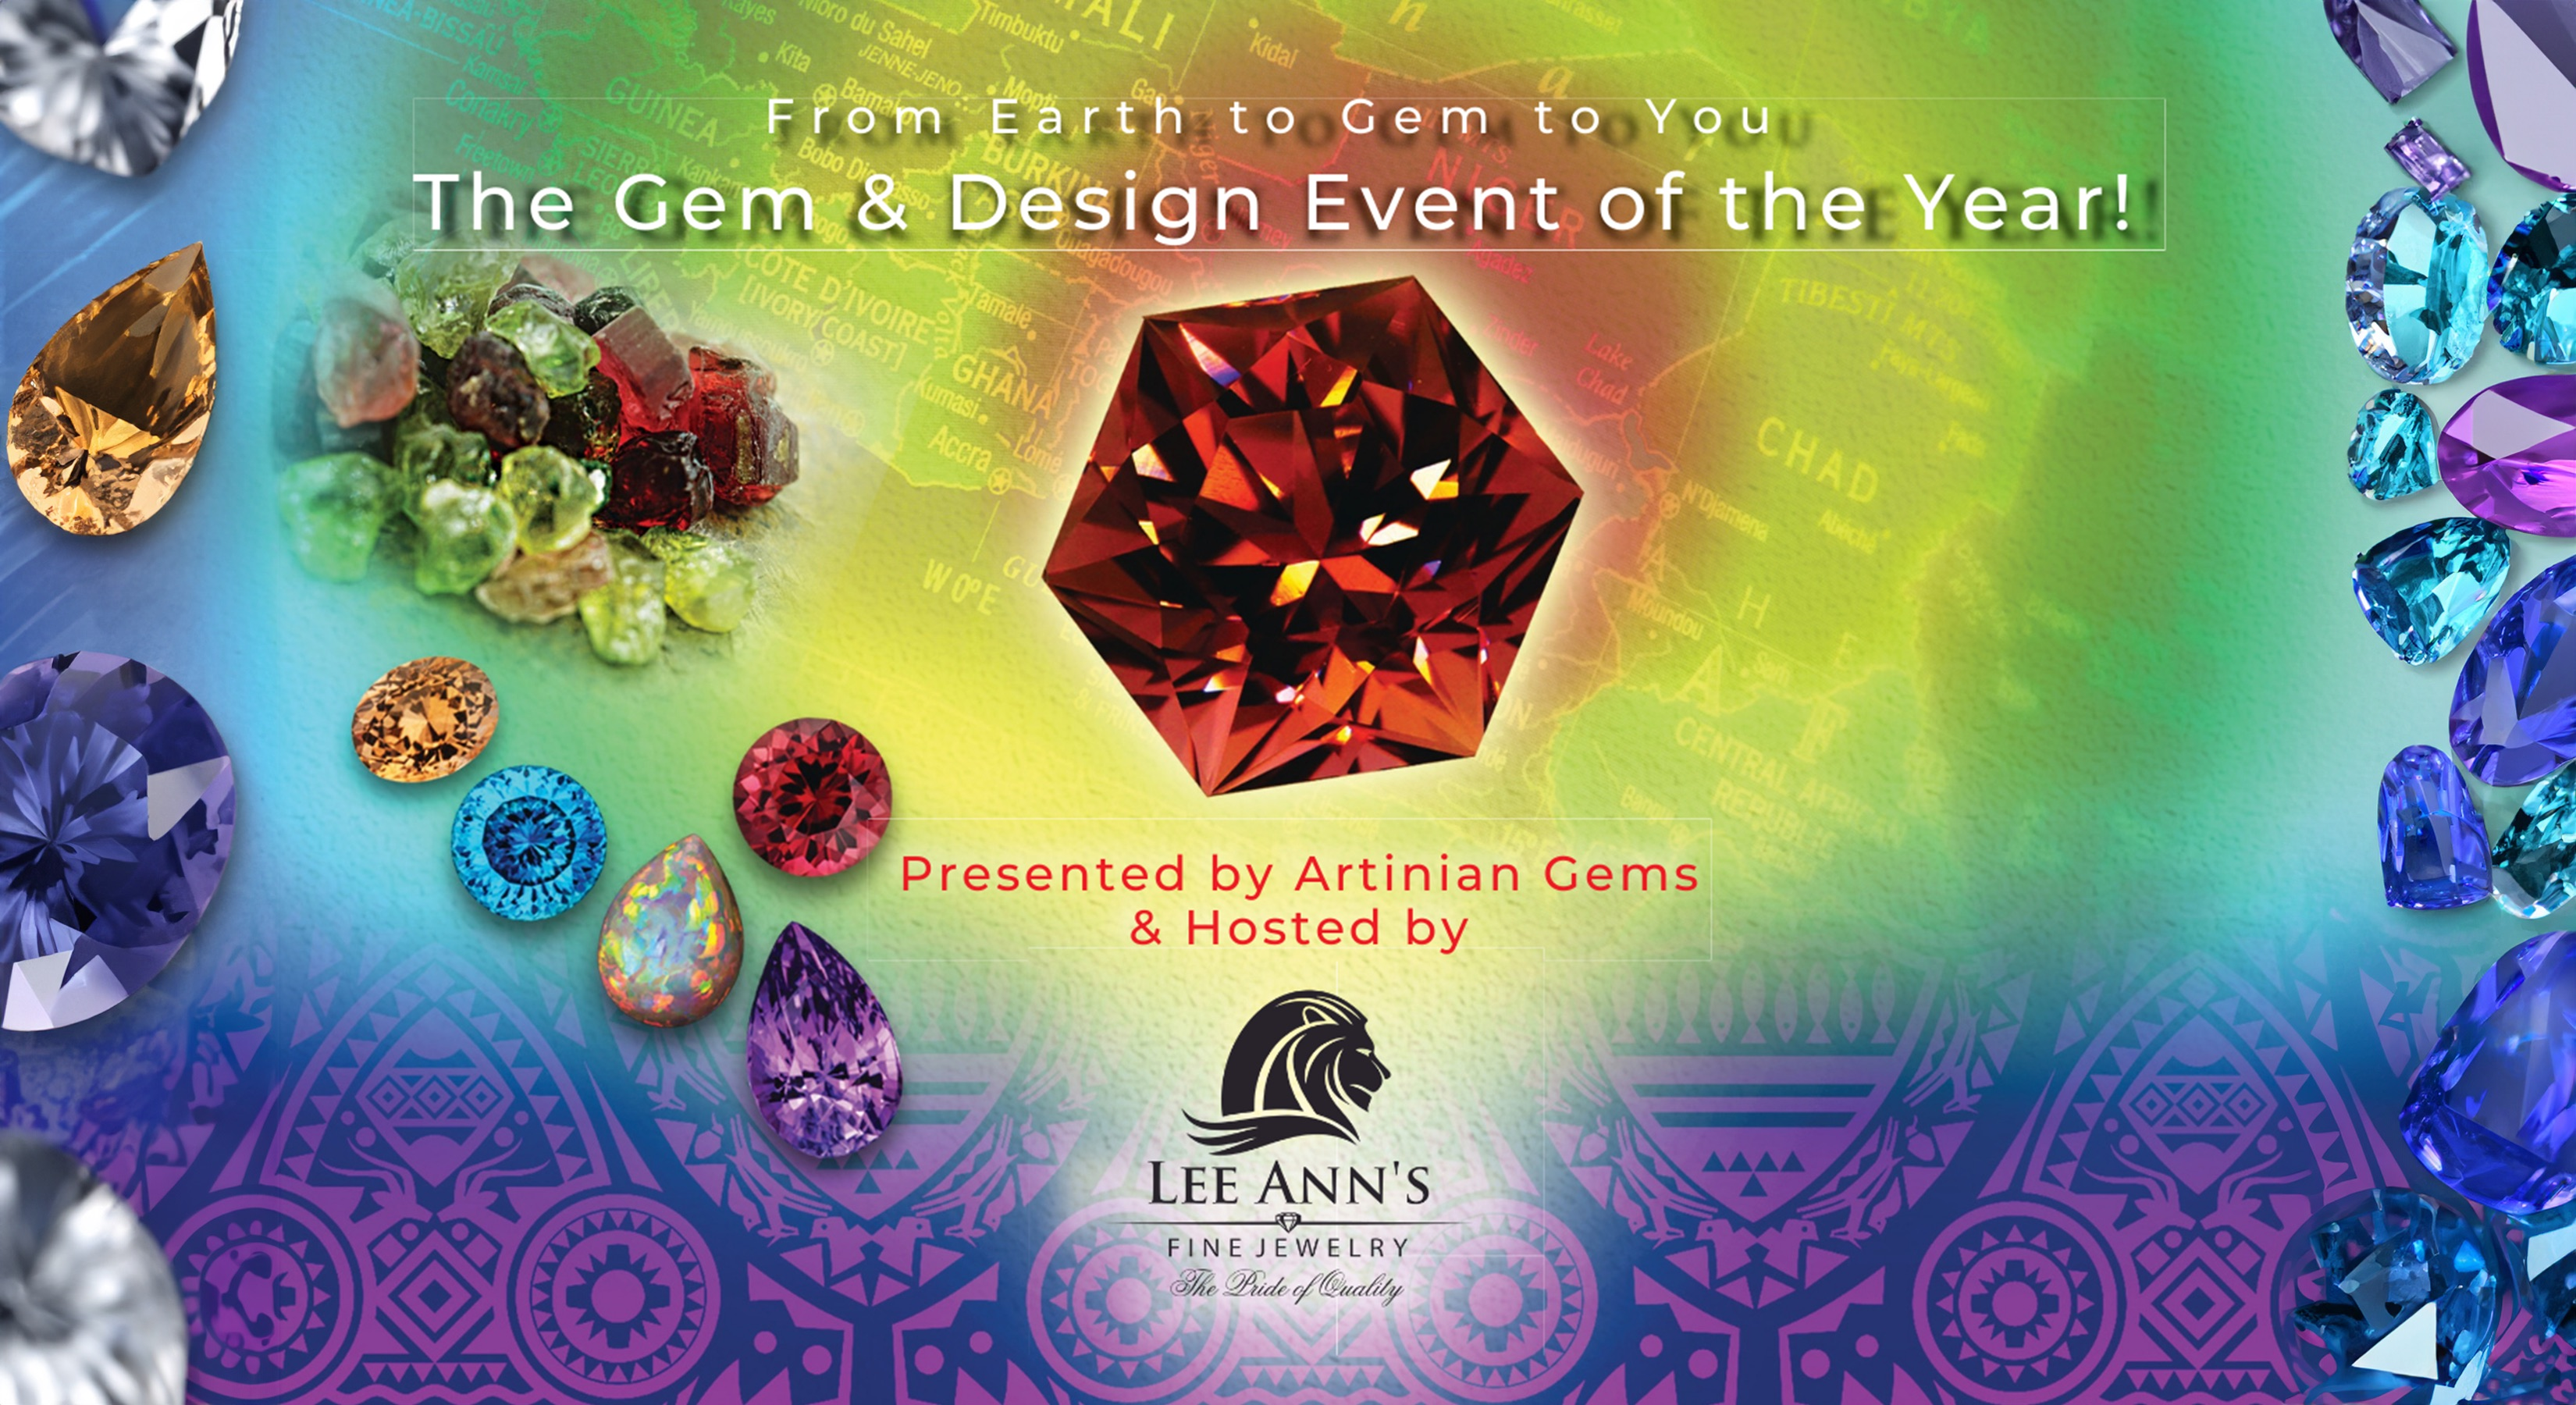  We invite you to join us at Conway for our first gem event. Our cases will be filled with one-of-a-kind, exquisitely cut, color